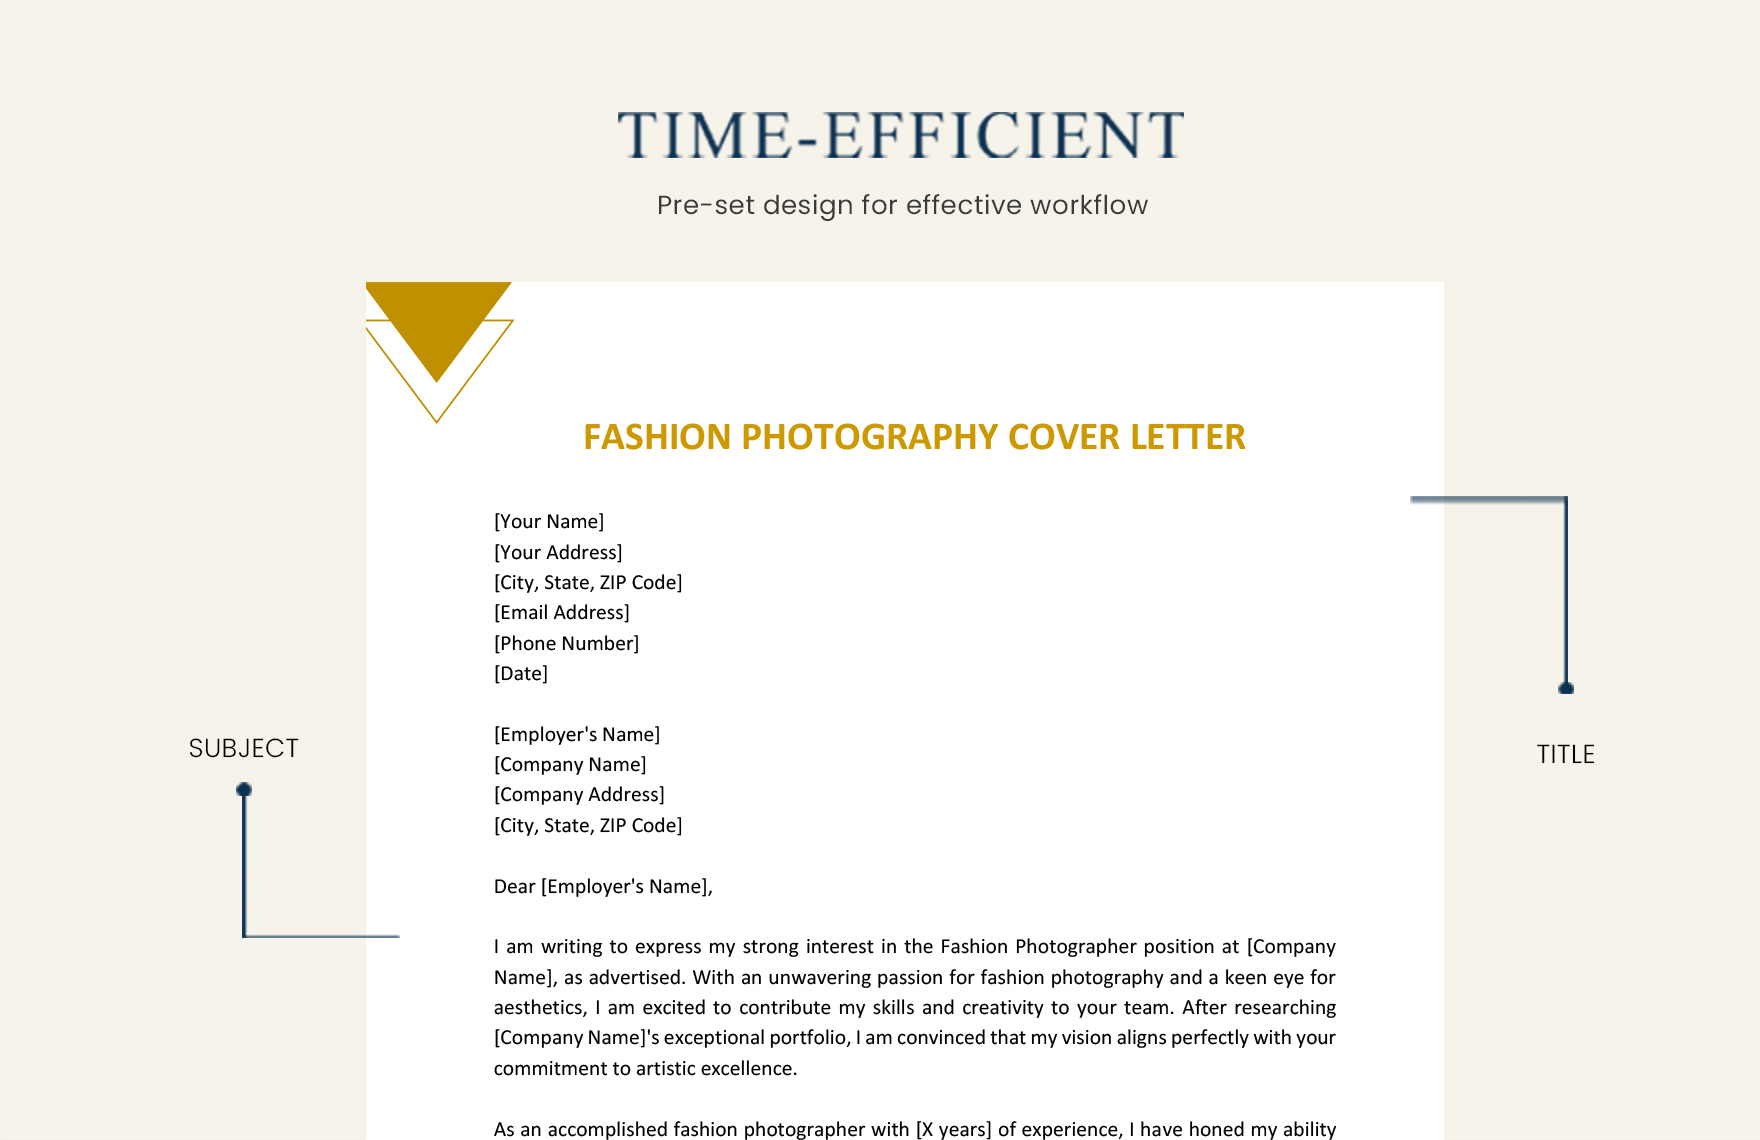 Fashion Photography Cover Letter